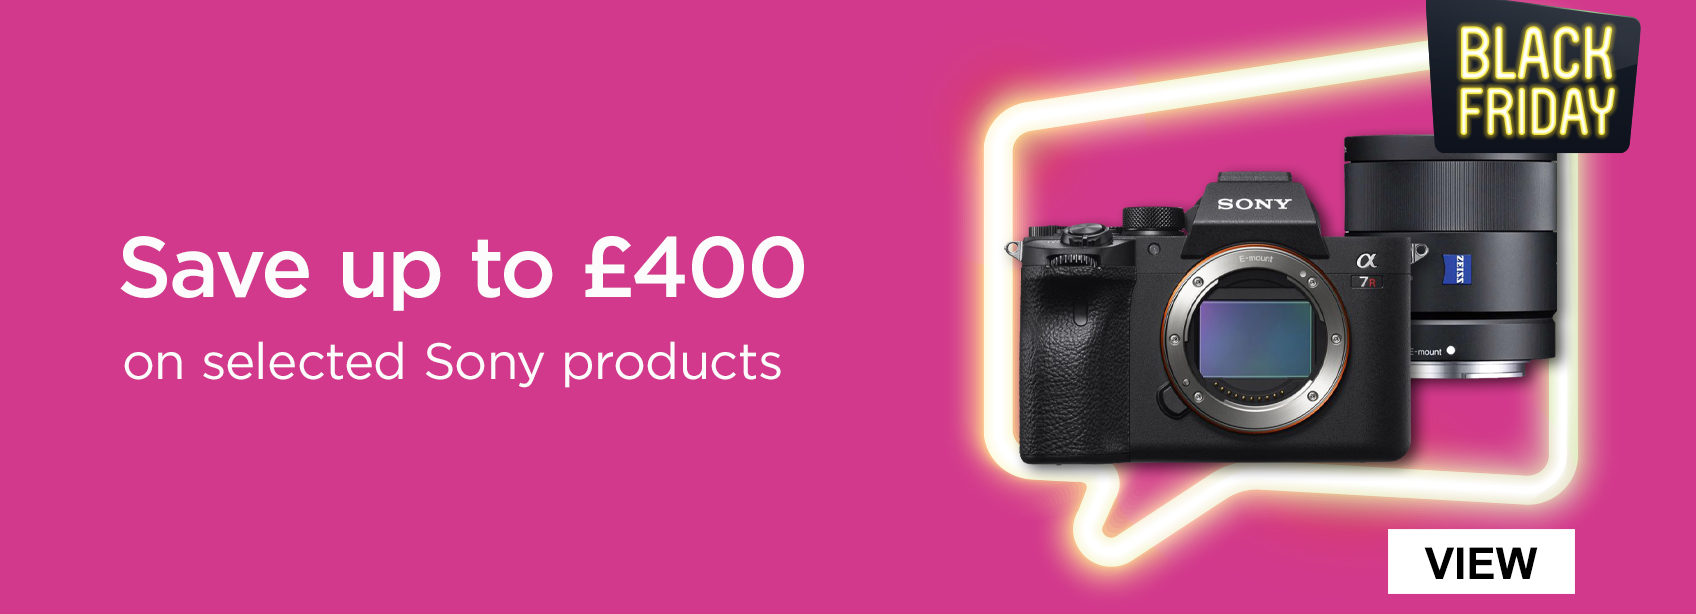 Save up to £400 on selected sony products